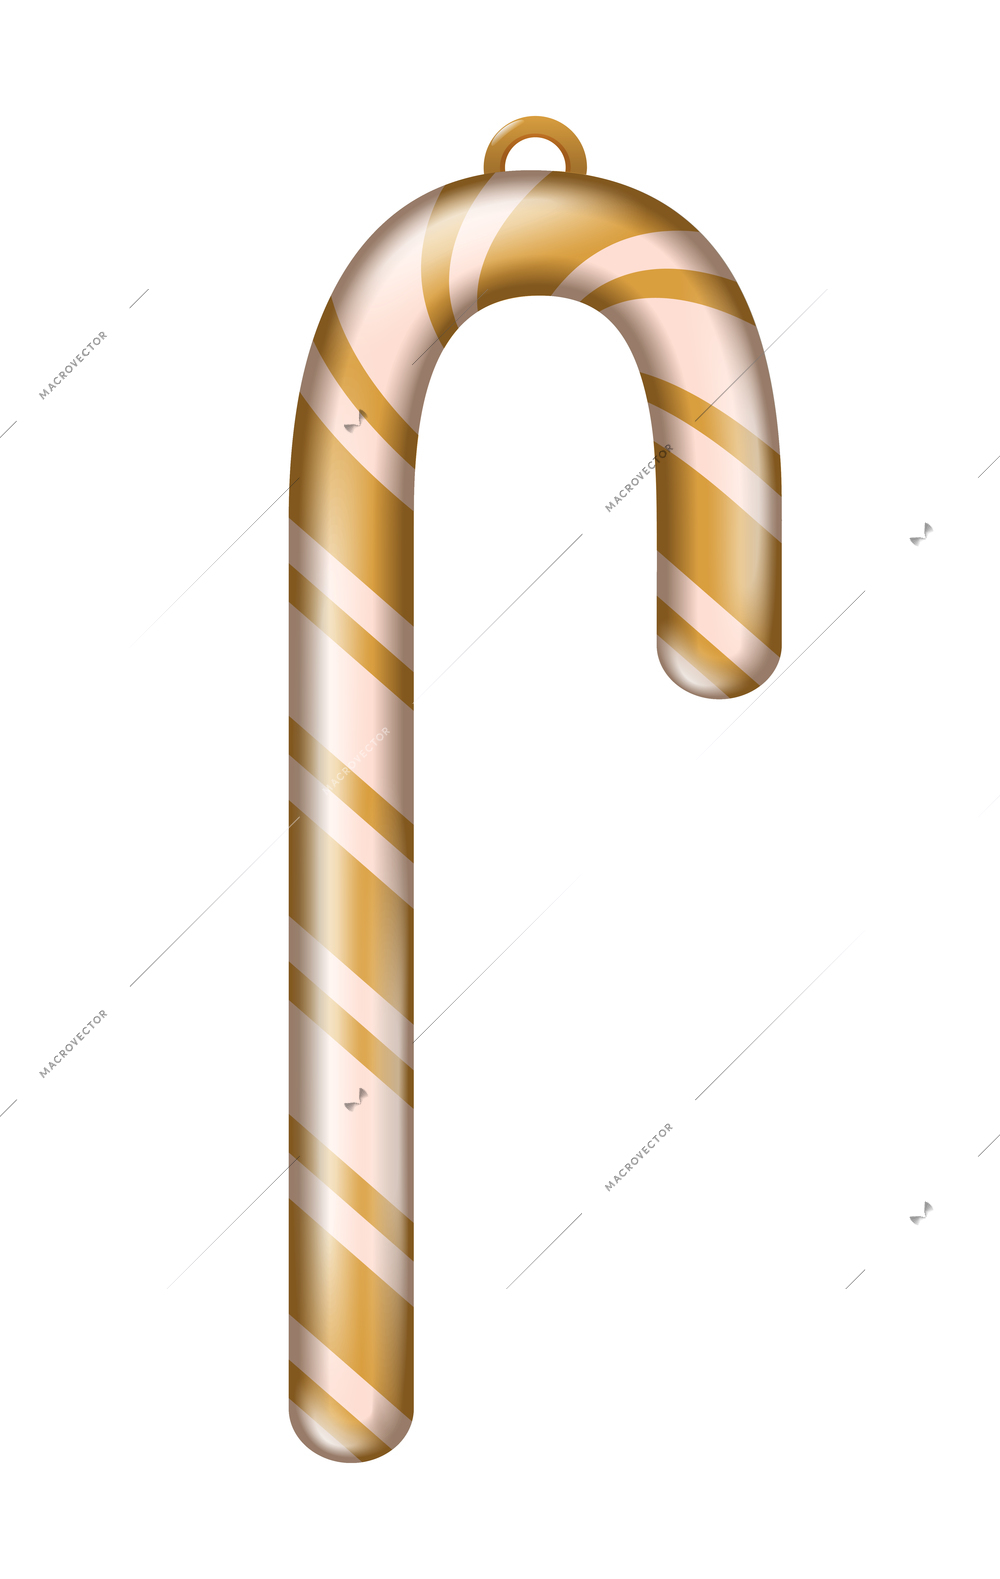 Realistic christmas tree toy composition with sweet candy stick shaped christmas ornament vector illustration